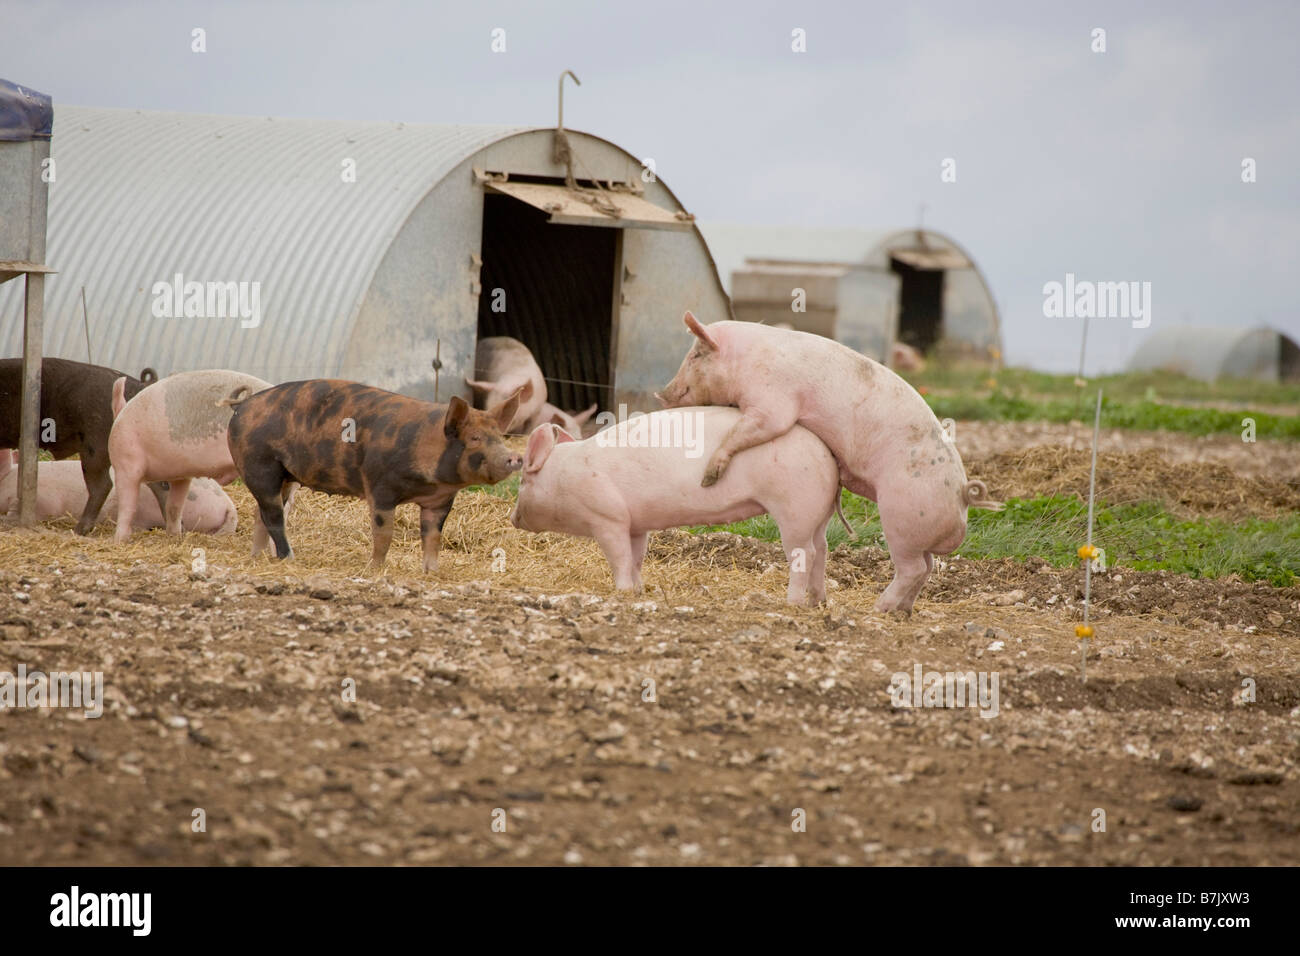 Pig farm with ark shelters makin making bacon mating Stock Photo